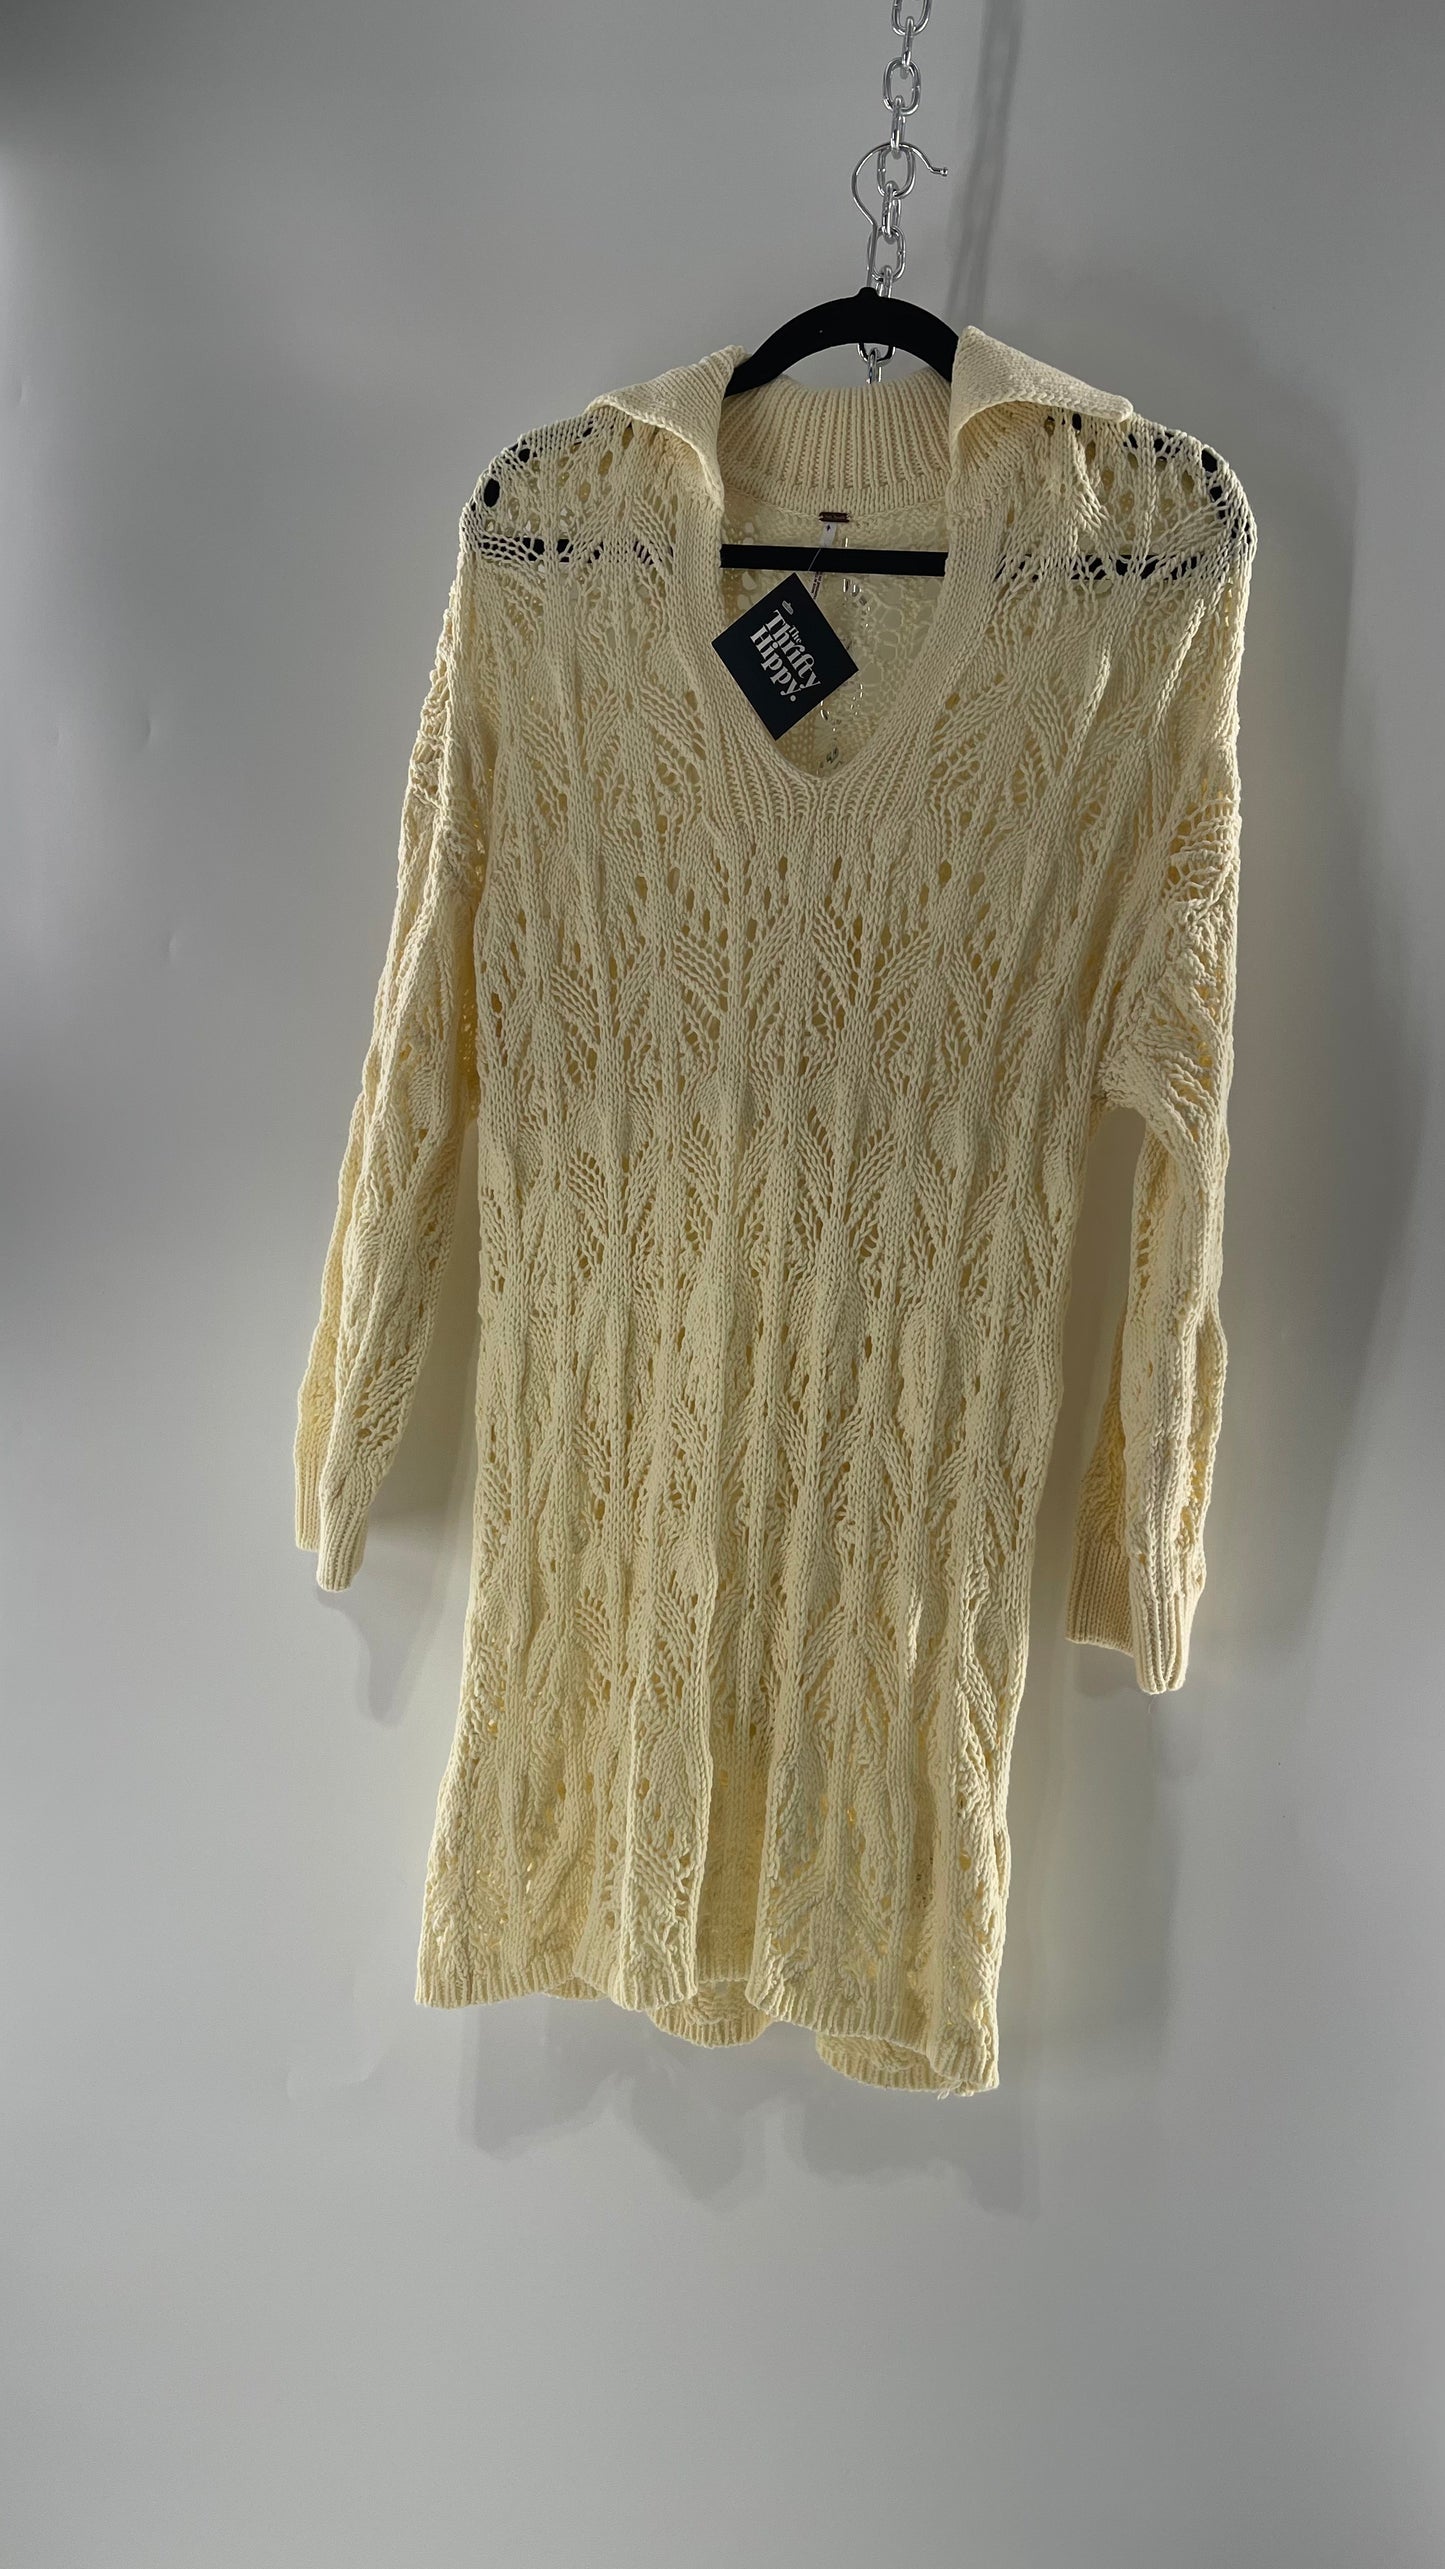 Free People Baby Yellow Comfy n Cozy Open Stitch Knit Sweater Dress (XS)